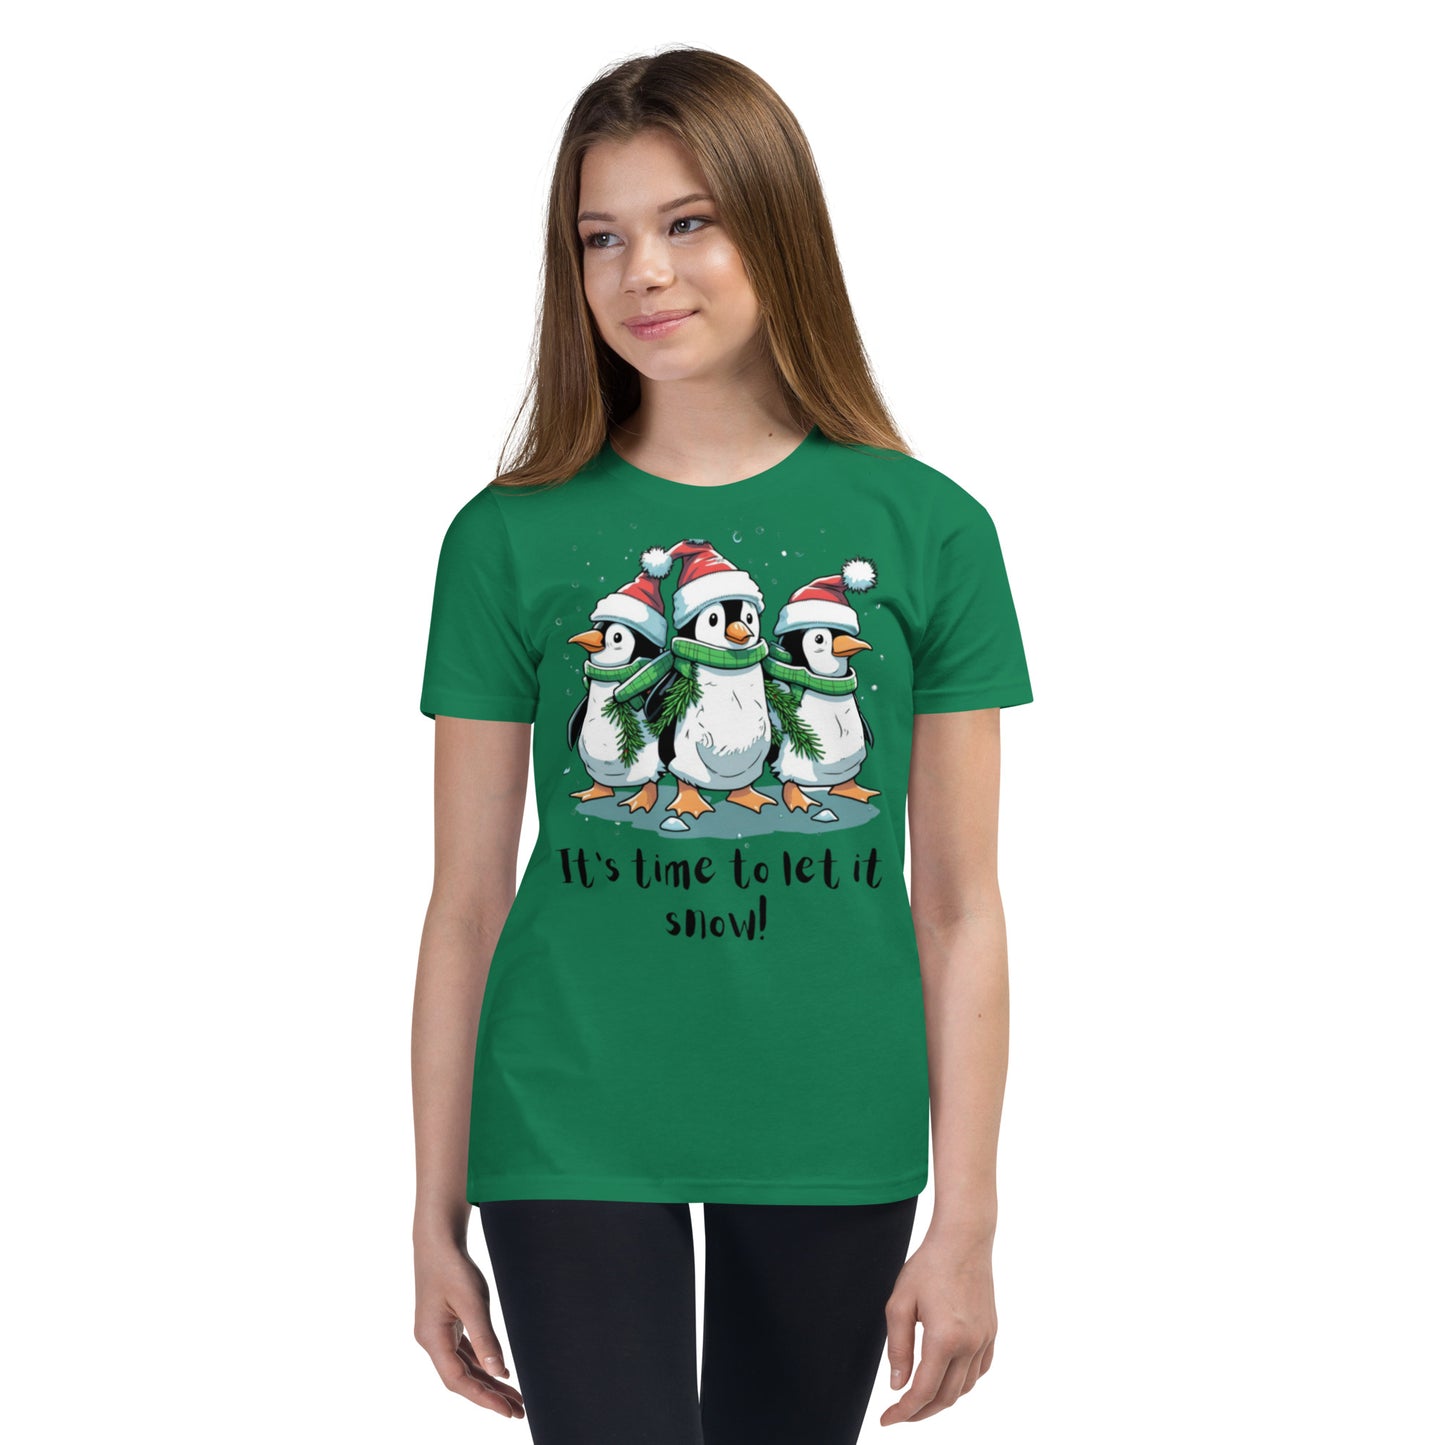 Let it snow Youth Short Sleeve T-Shirt